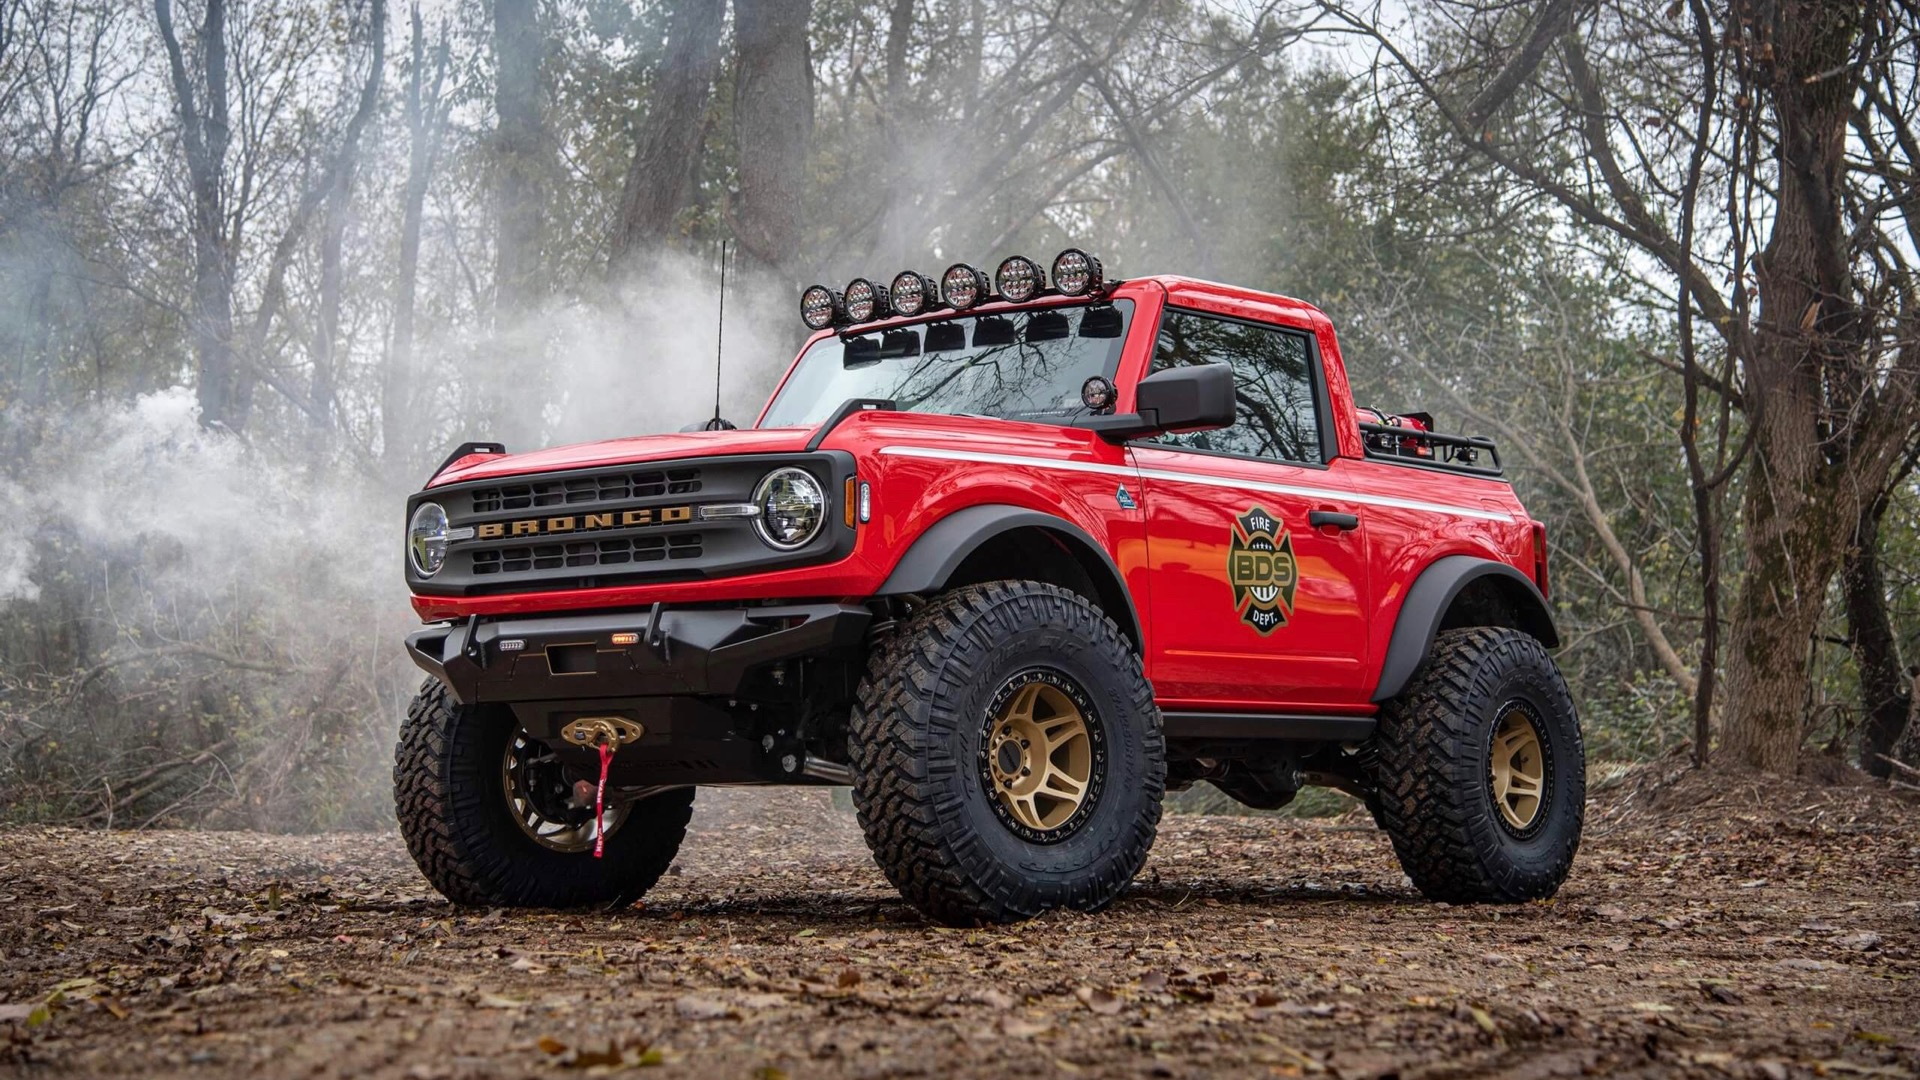 2021 Ford Bronco by BDS Suspension